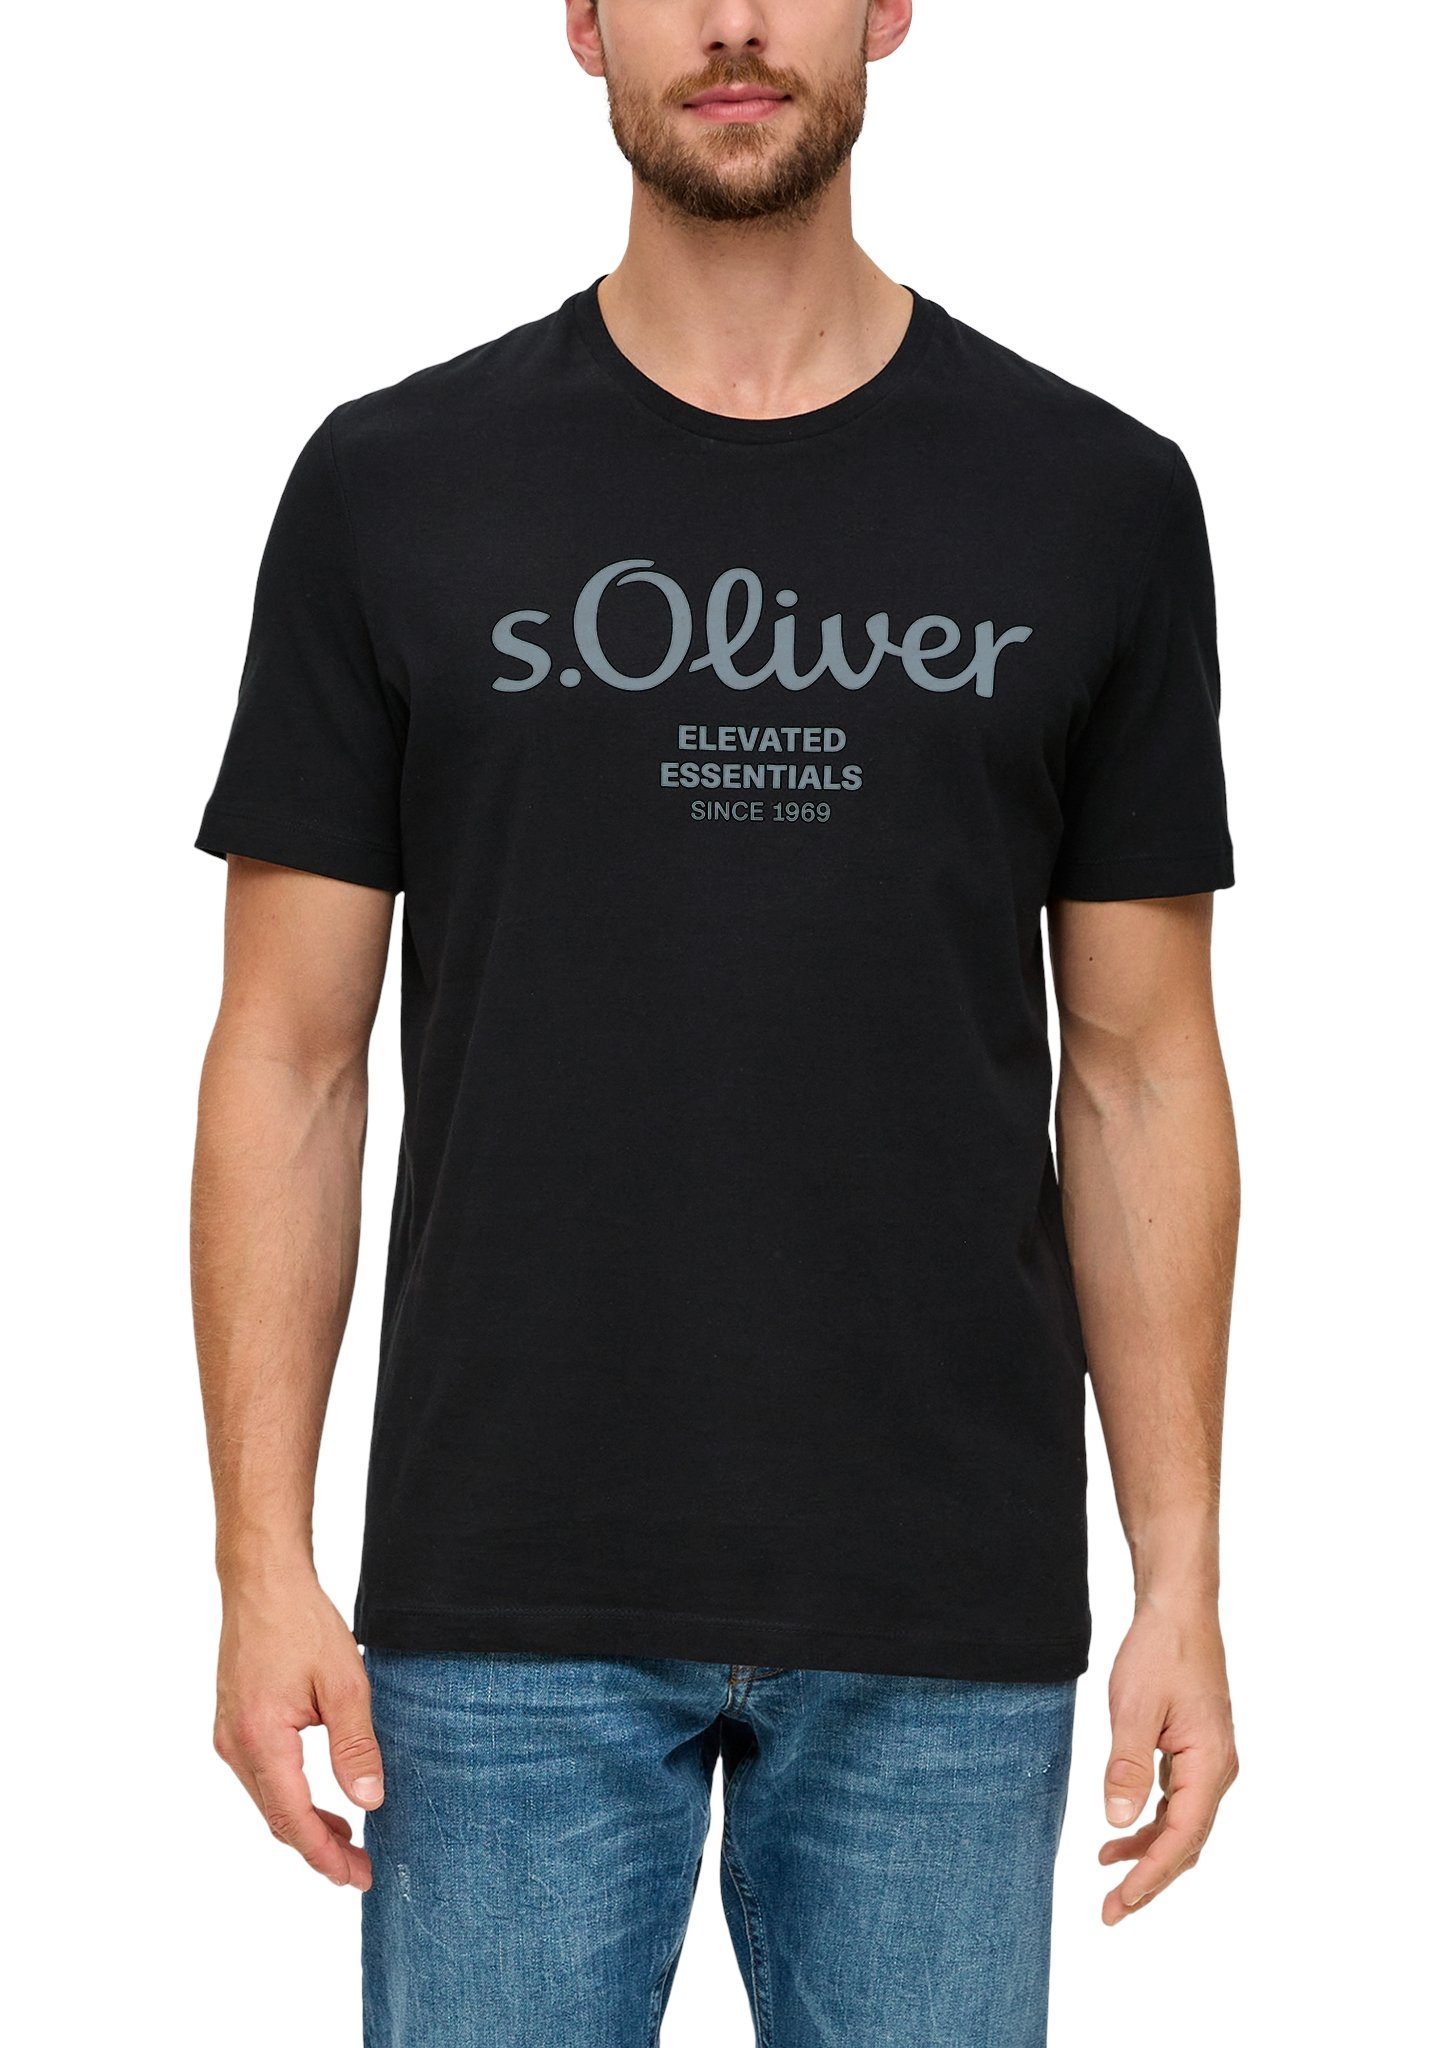 s.Oliver T-Shirt im sportiven Look